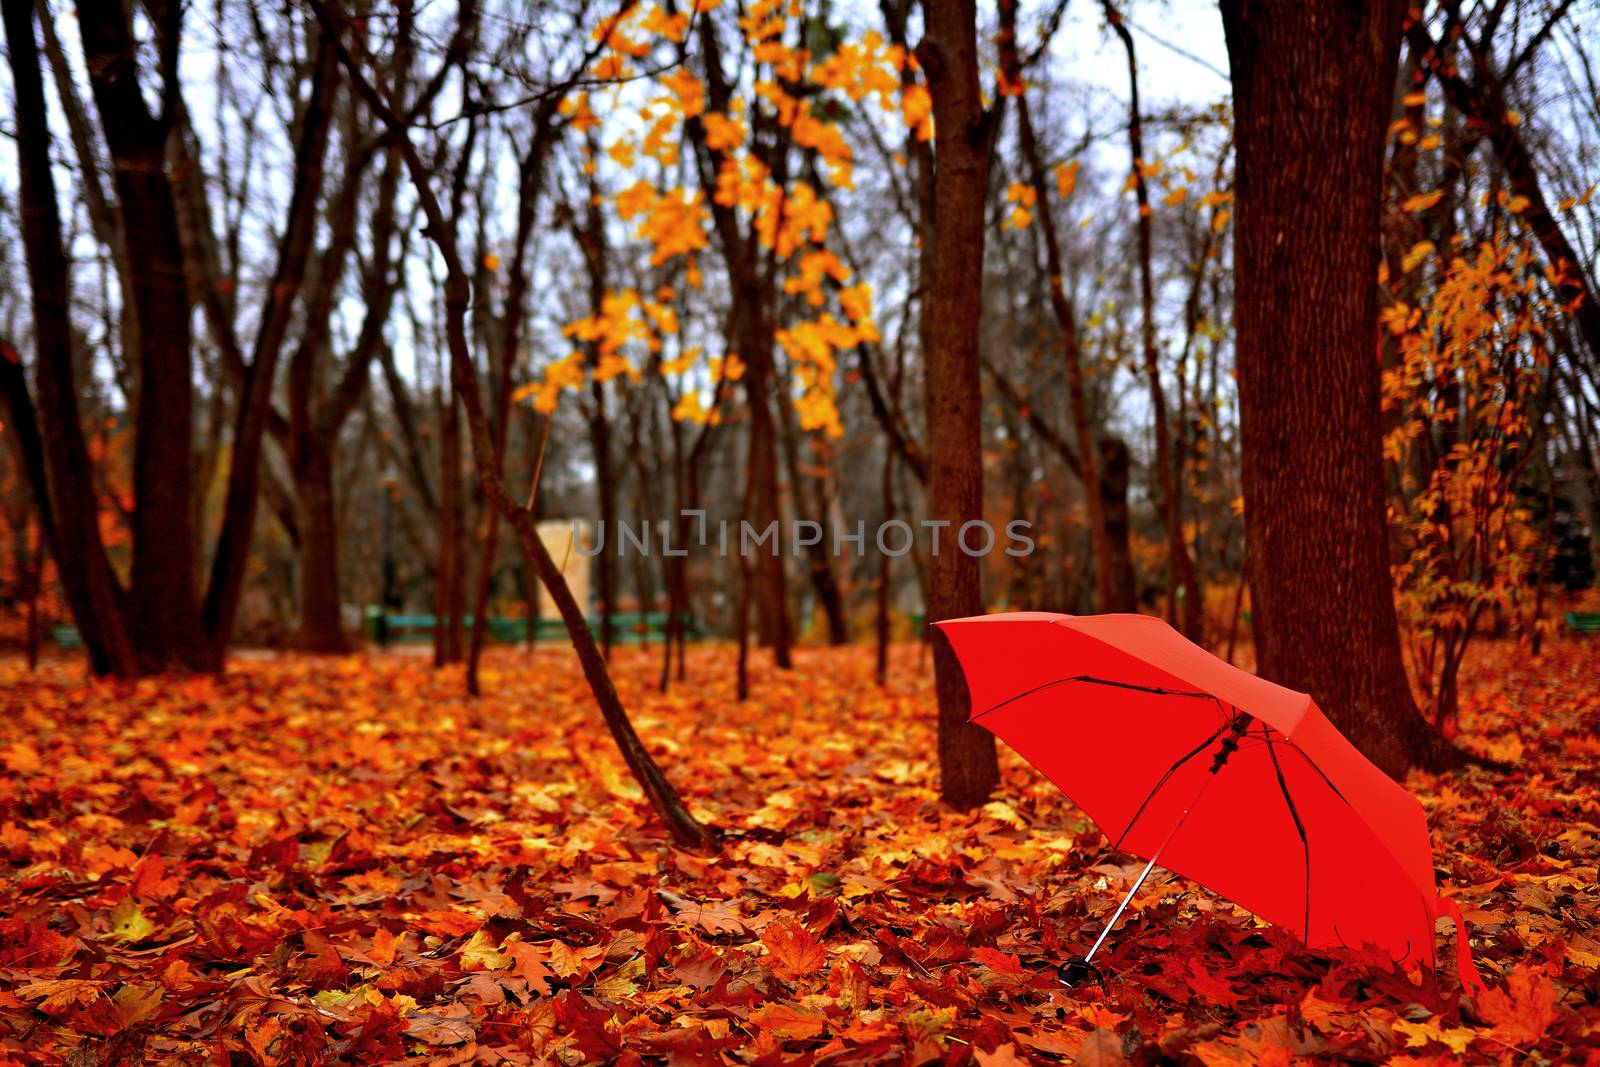 Autumn fall in the park with orange umbrella over withered yellow leaves.